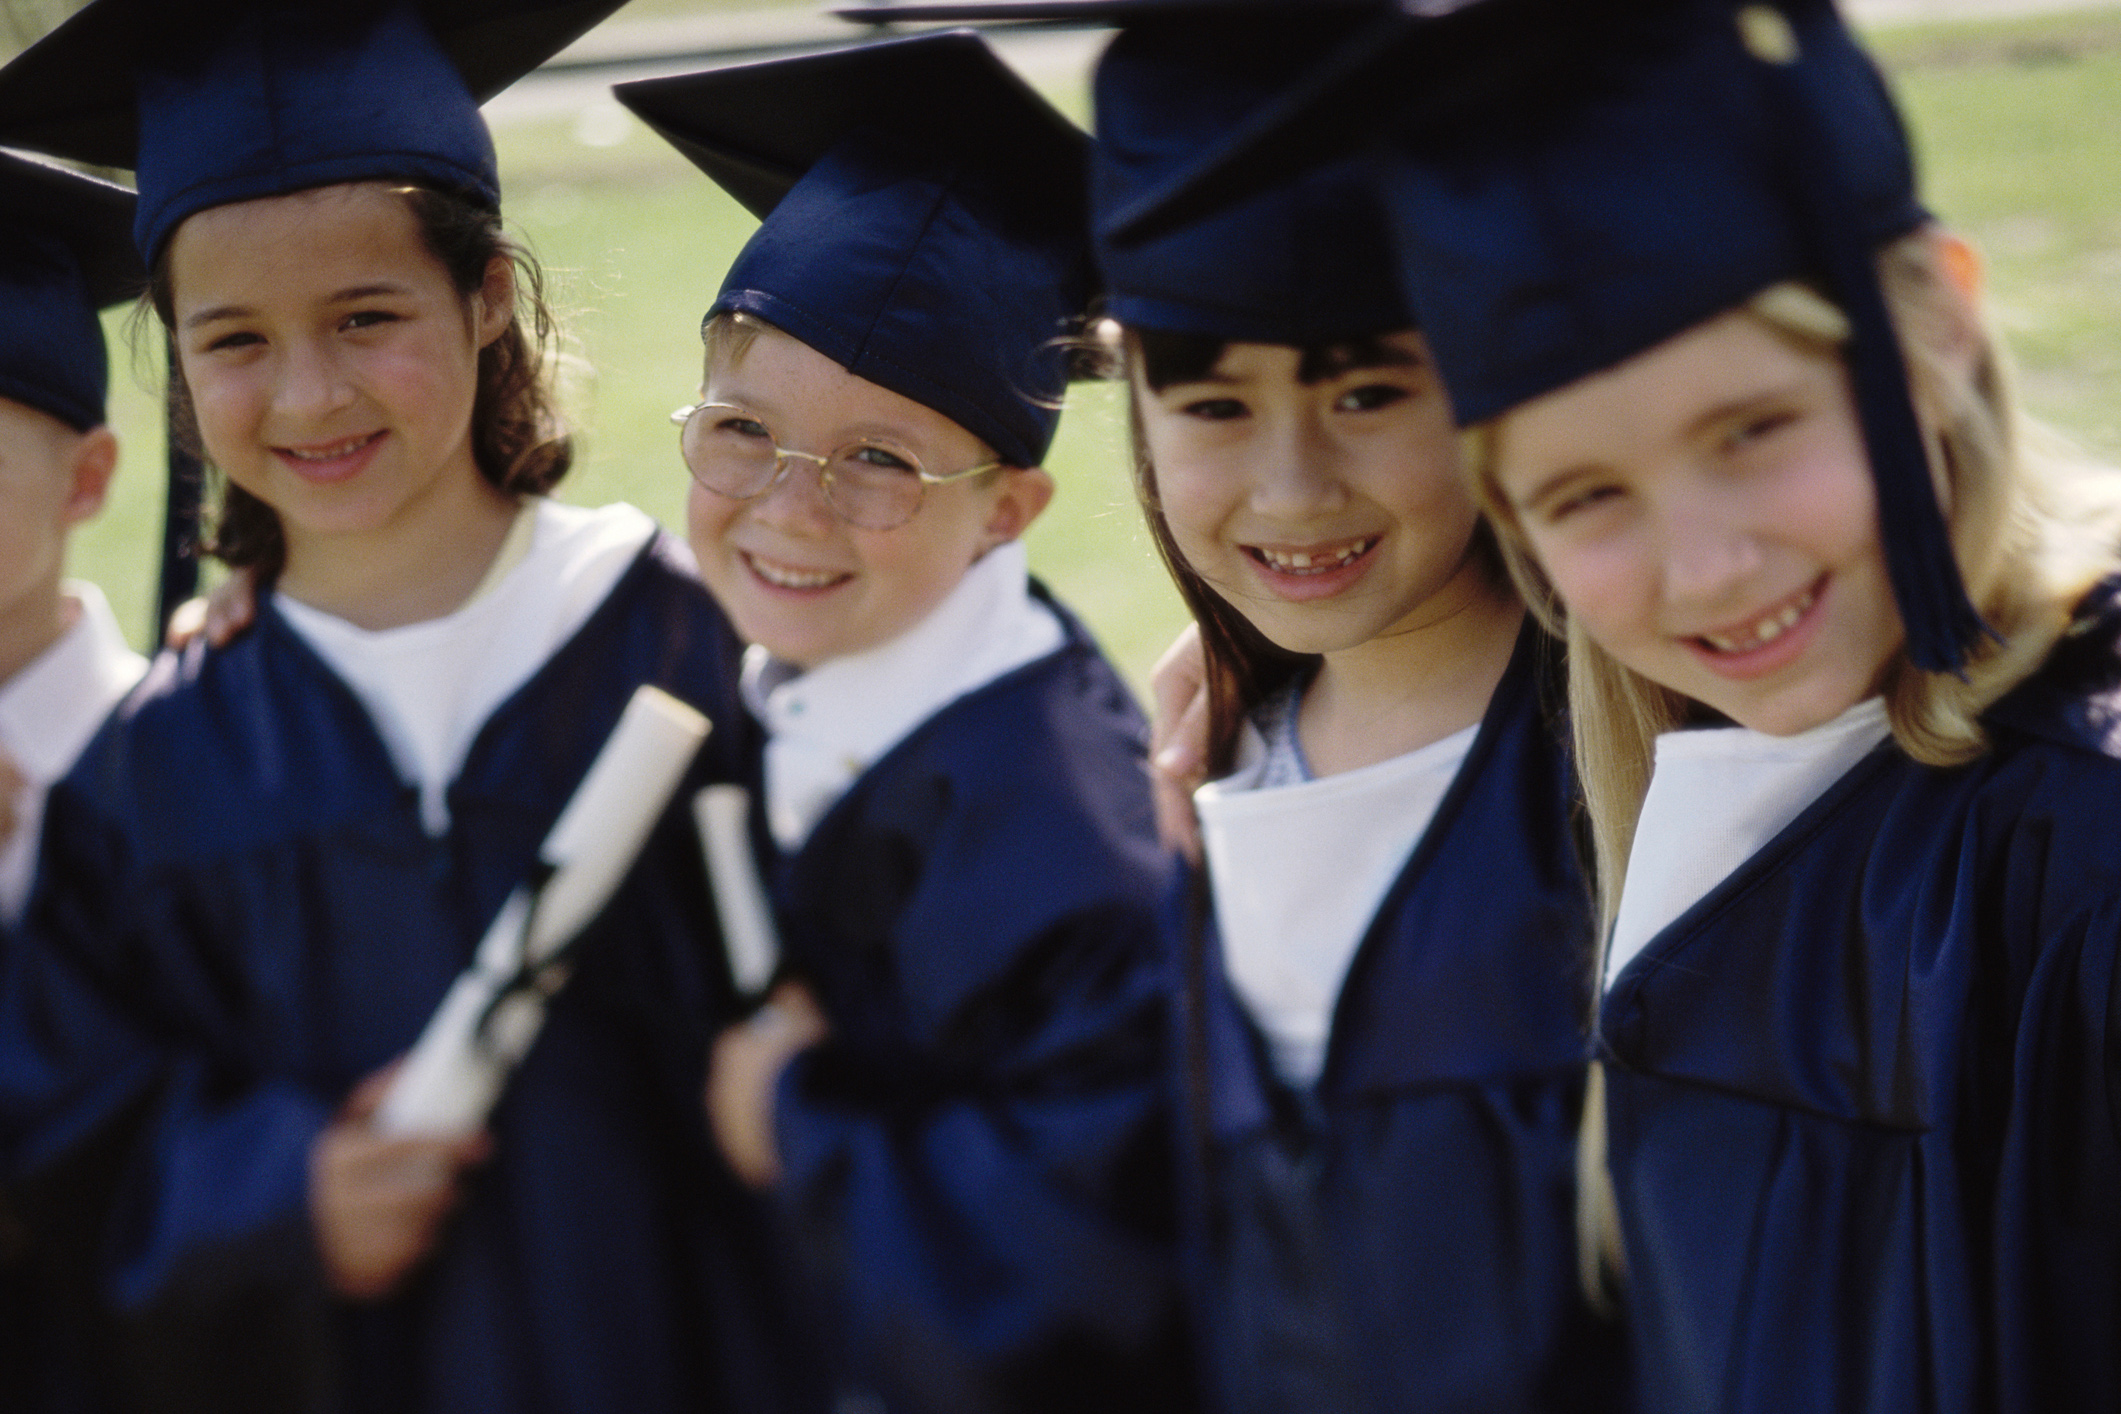 Is your child with special needs ready to graduate?